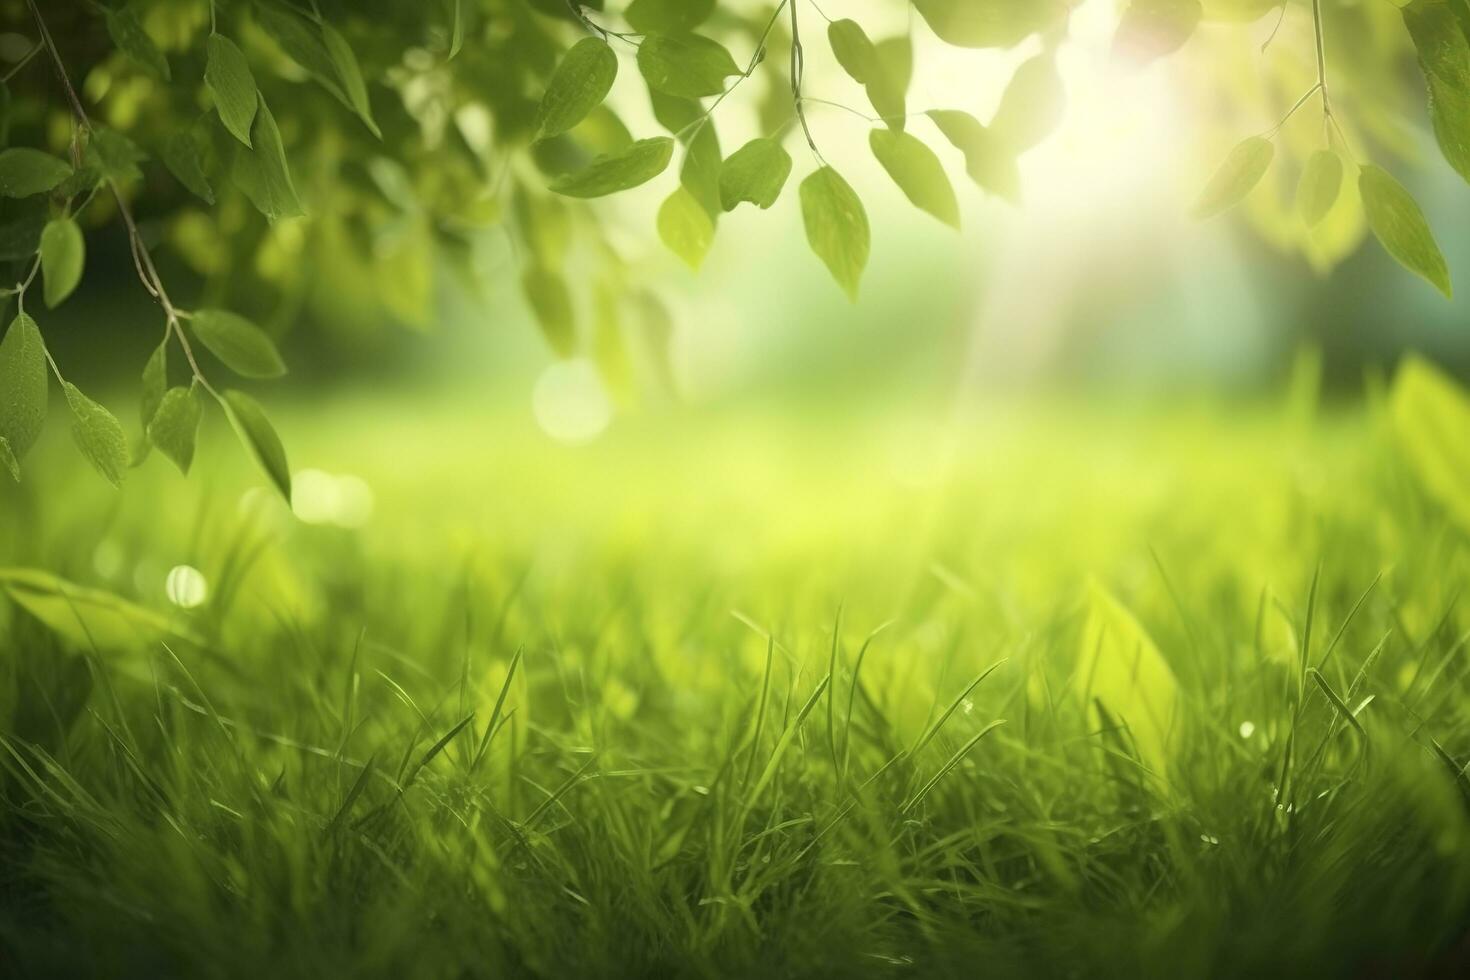 Natural green defocused spring summer blurred background with sunshine. Juicy young grass and foliage on nature in rays of sunlight, scenic framing, copy space photo